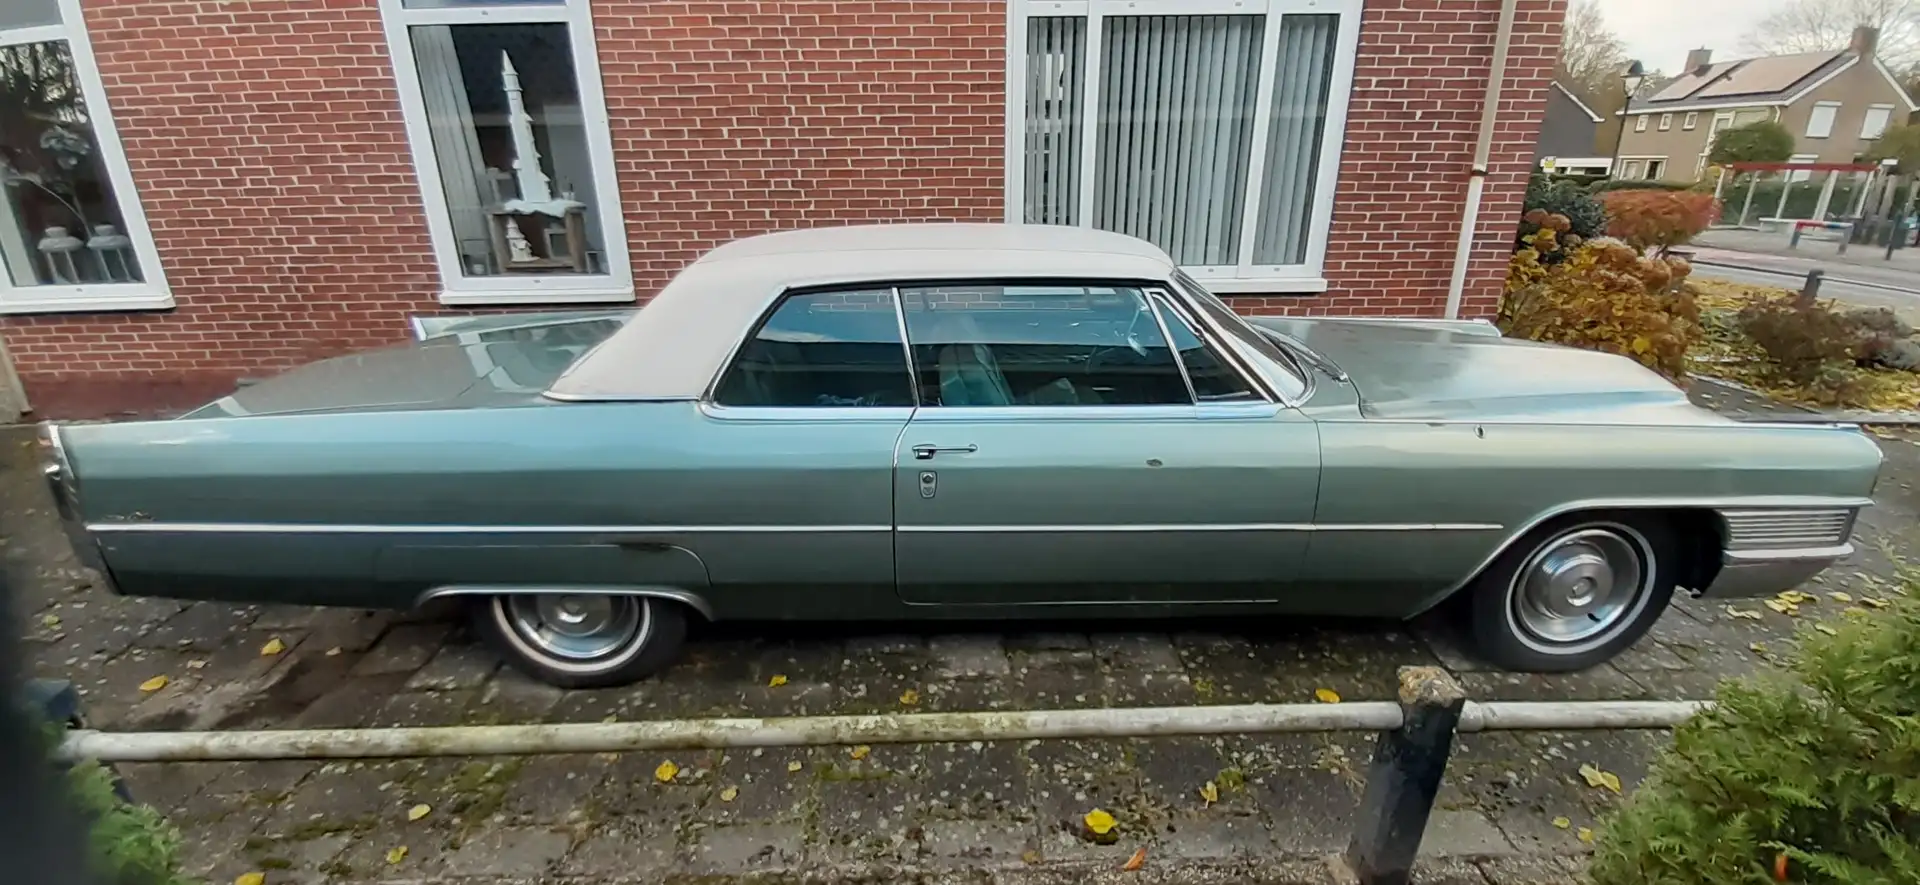 Cadillac Deville 6 CD 47 Coupe Green - 1